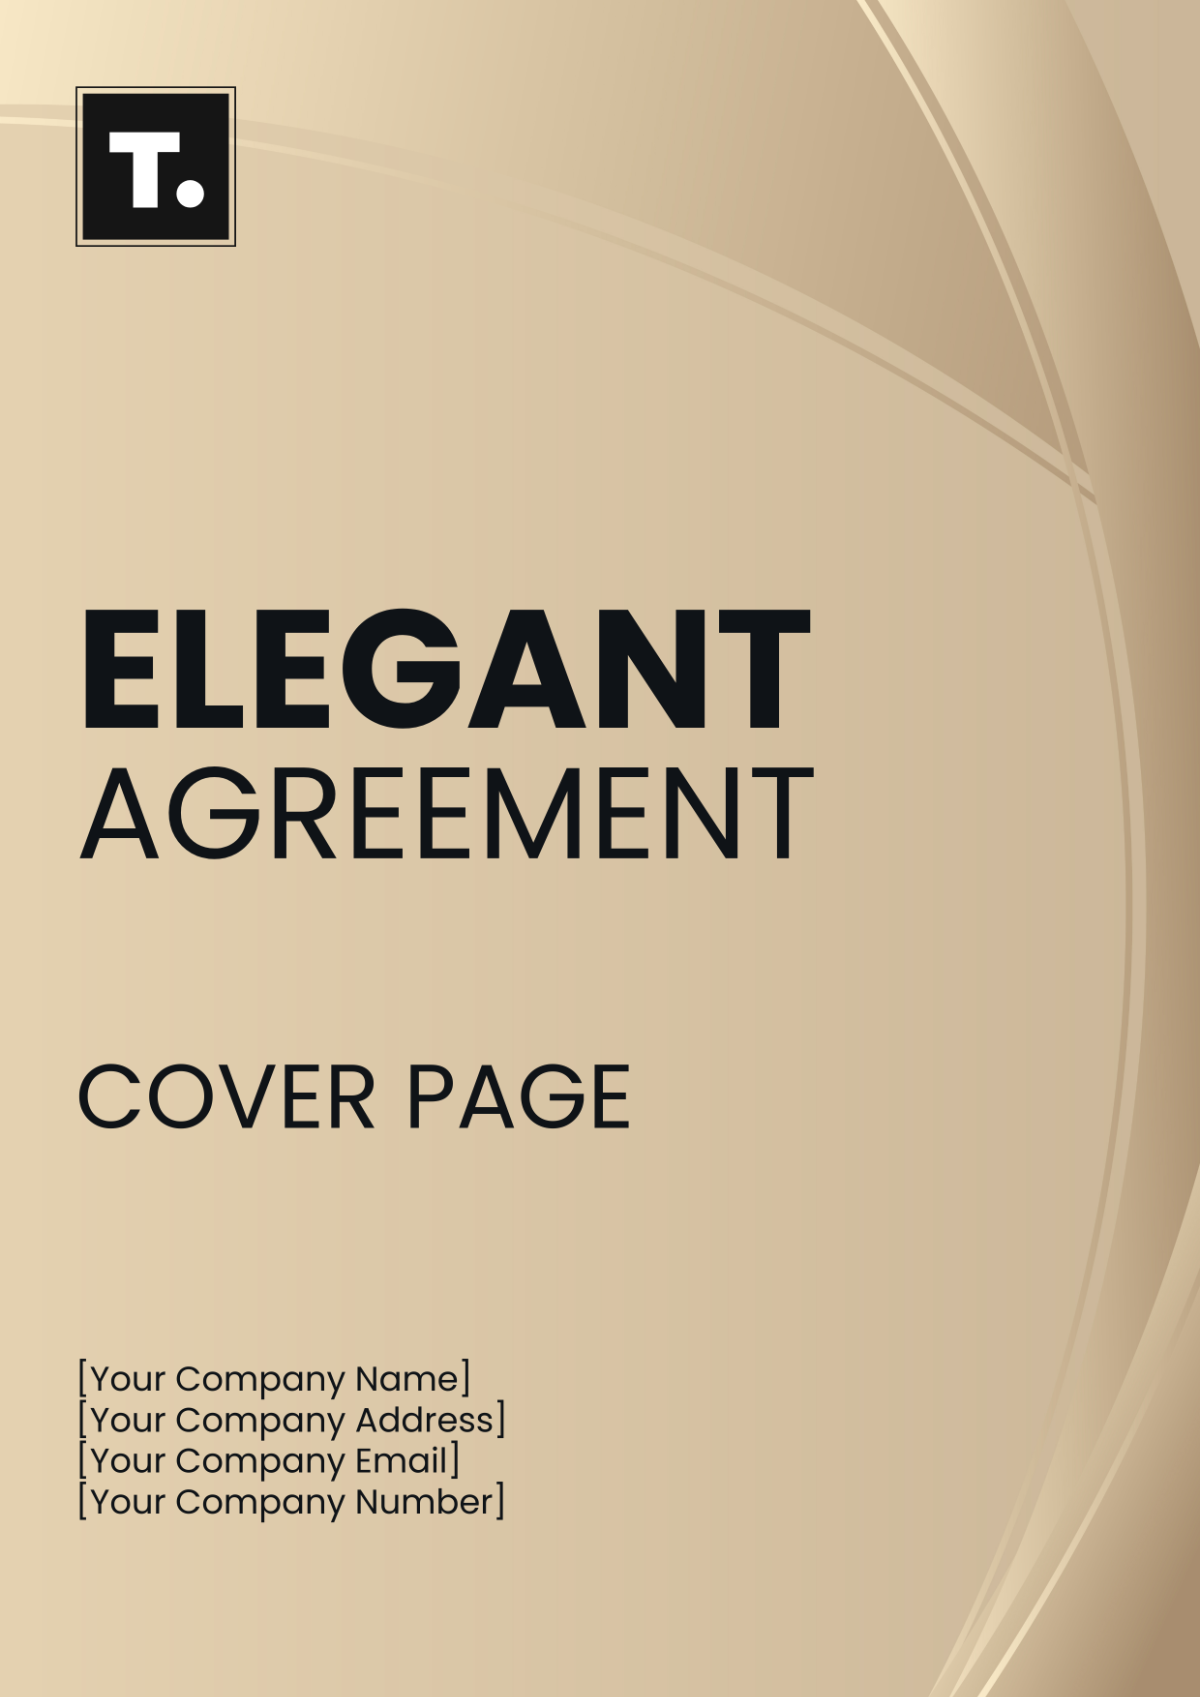 Elegant Agreement Cover Page